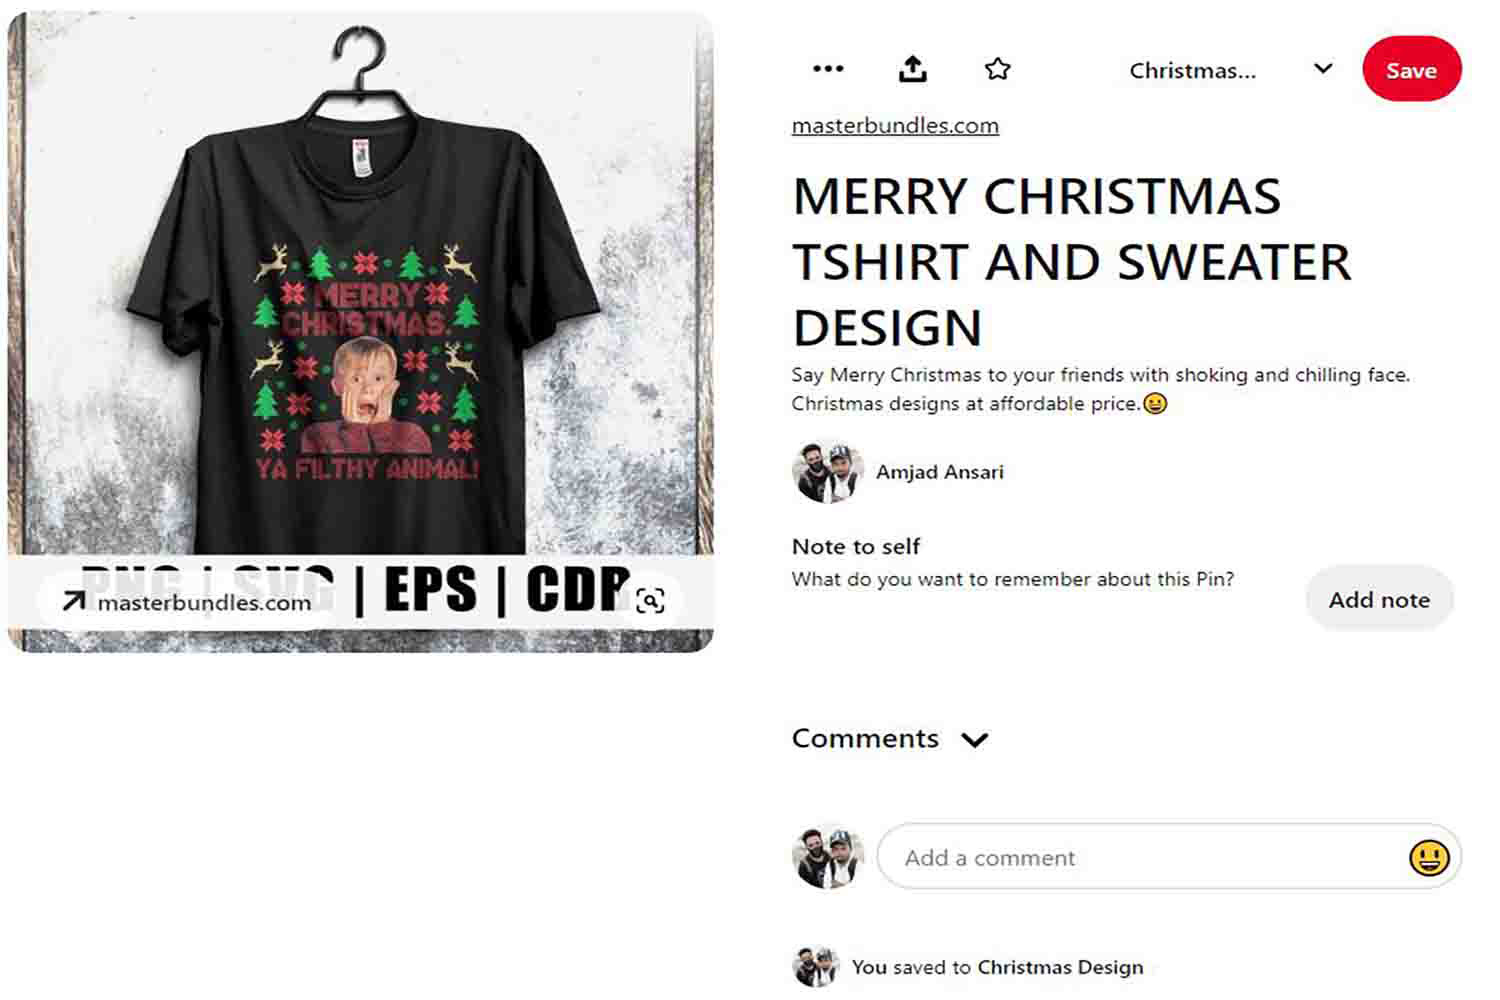 Merry Christmas T-shirt and Sweater Design pinterest image.